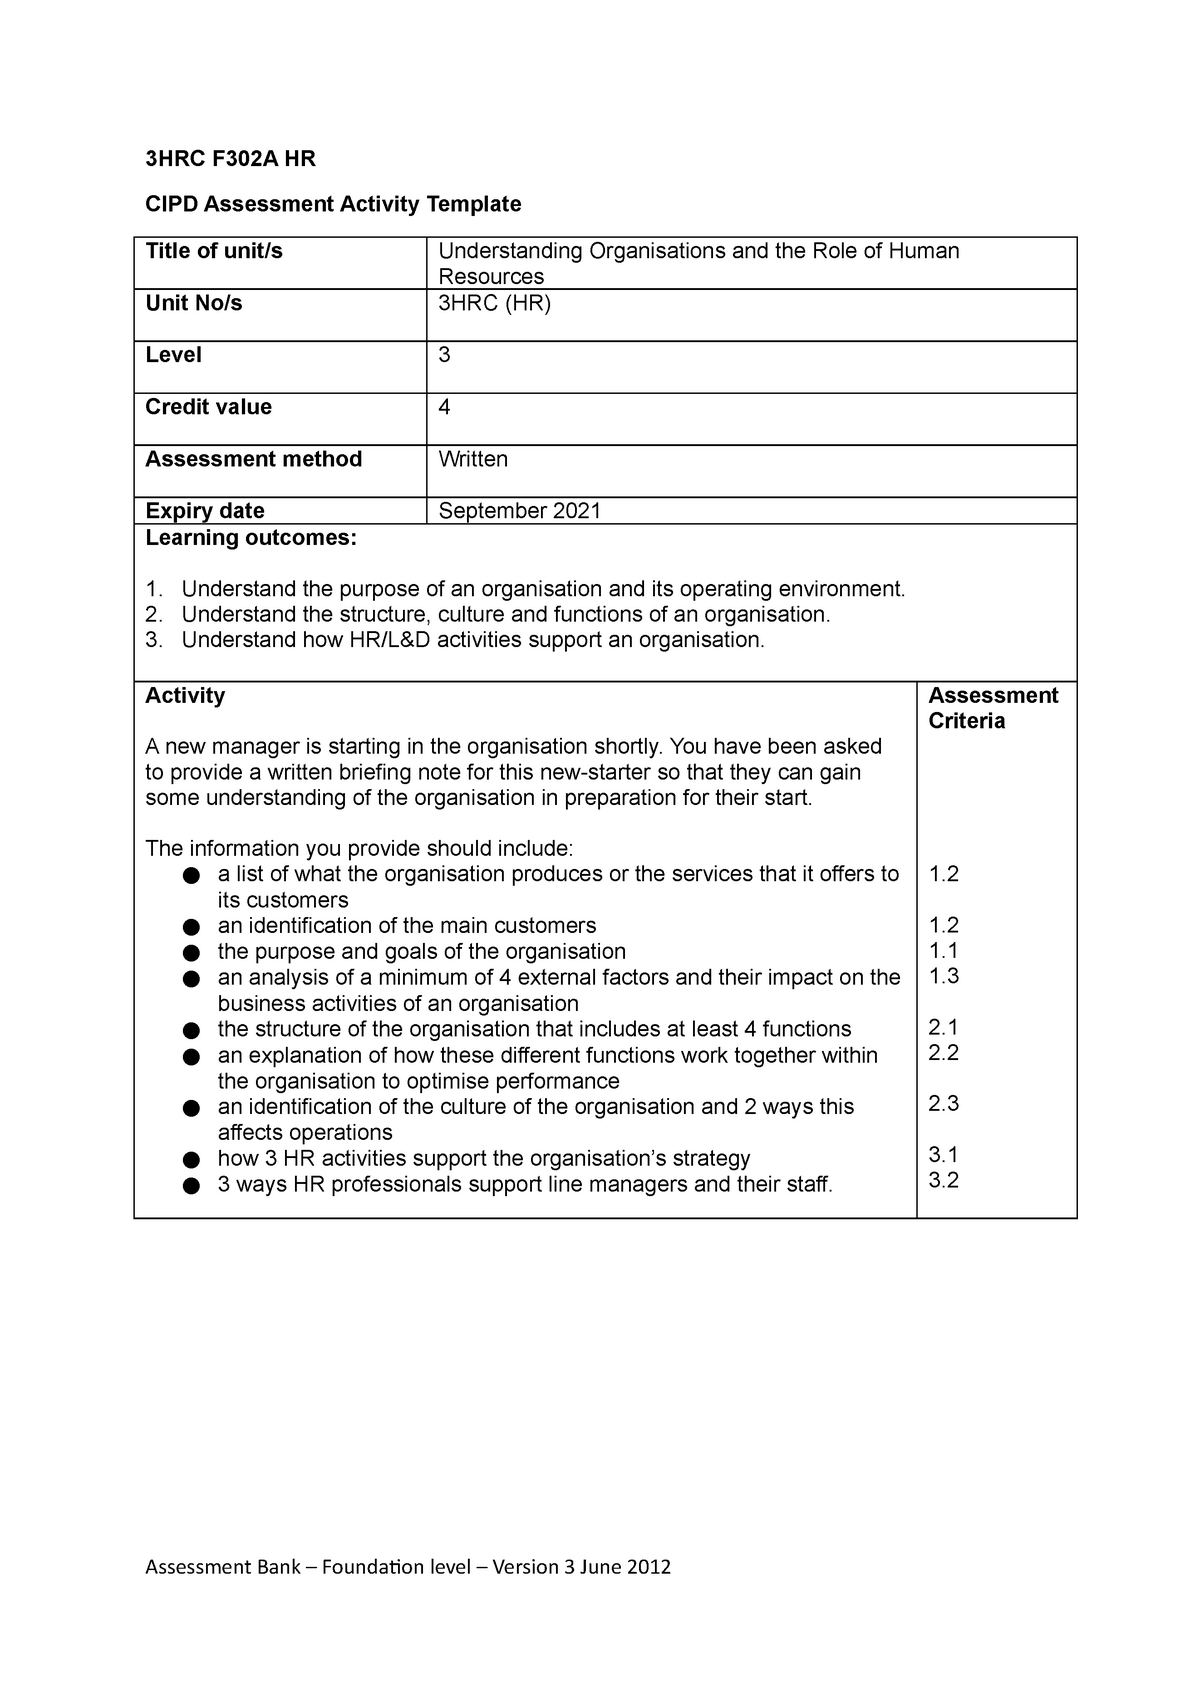 cipd level 3 assignment answers